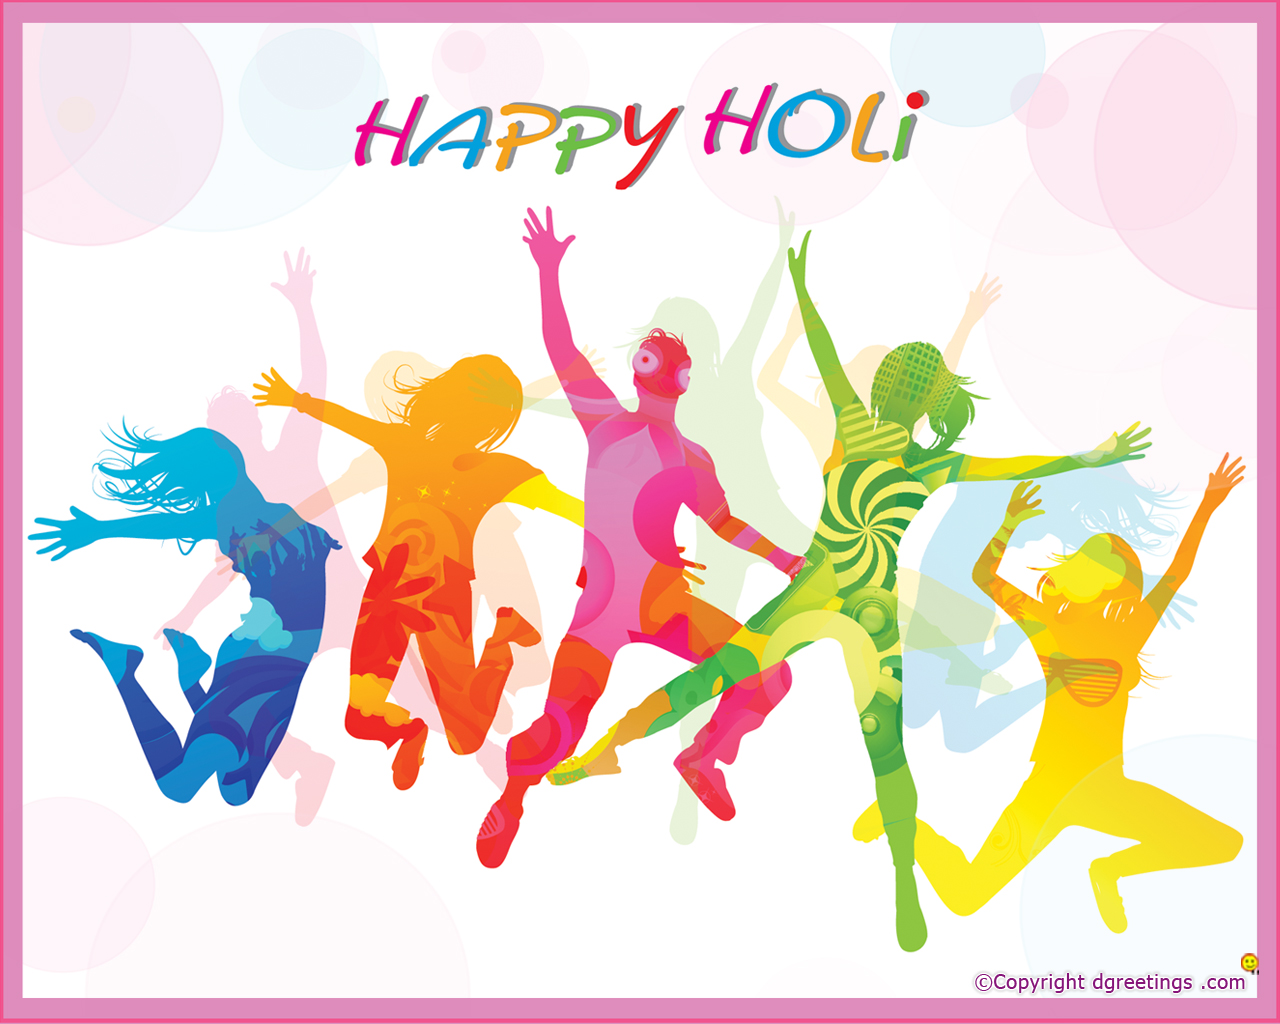 Holi Wallpaper Of Different Sizes Dgreetings